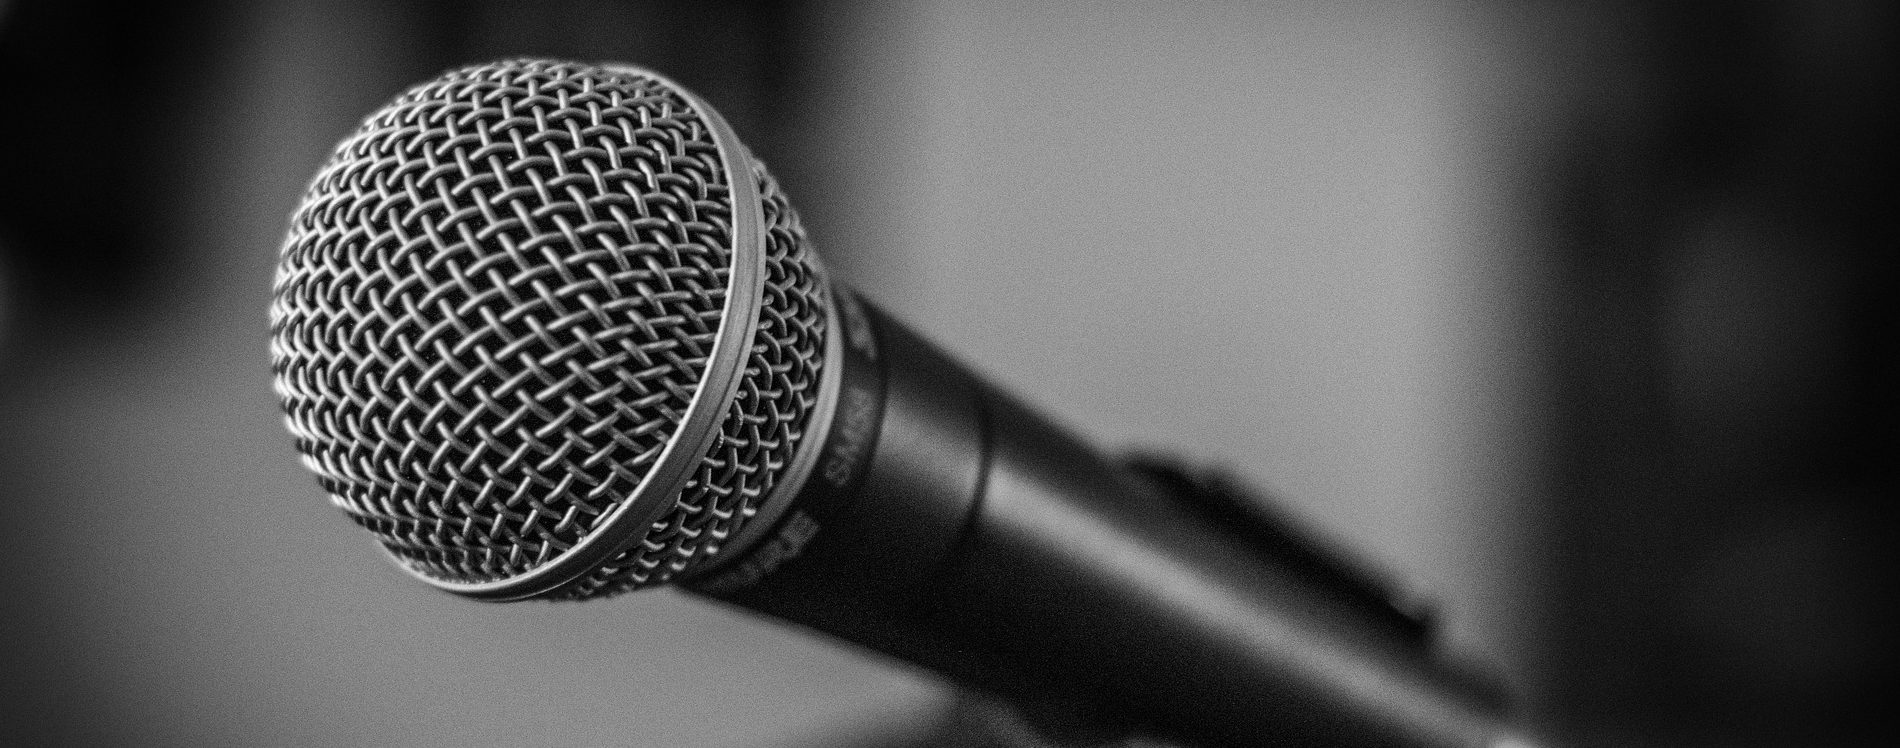 Pixabay - Free Clip Art - Use For Interviews - Microphone